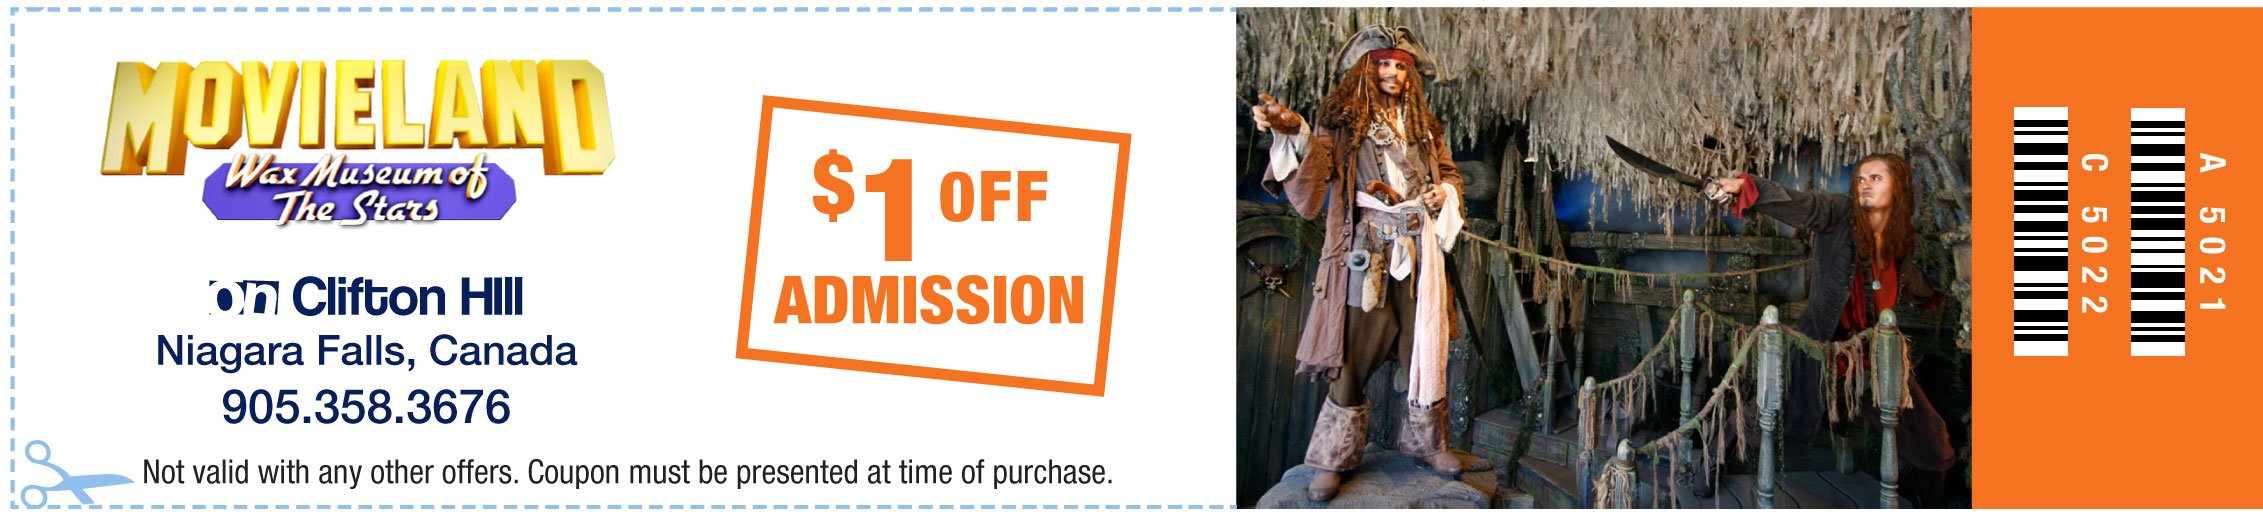 Movieland Wax Museum Admission Coupon